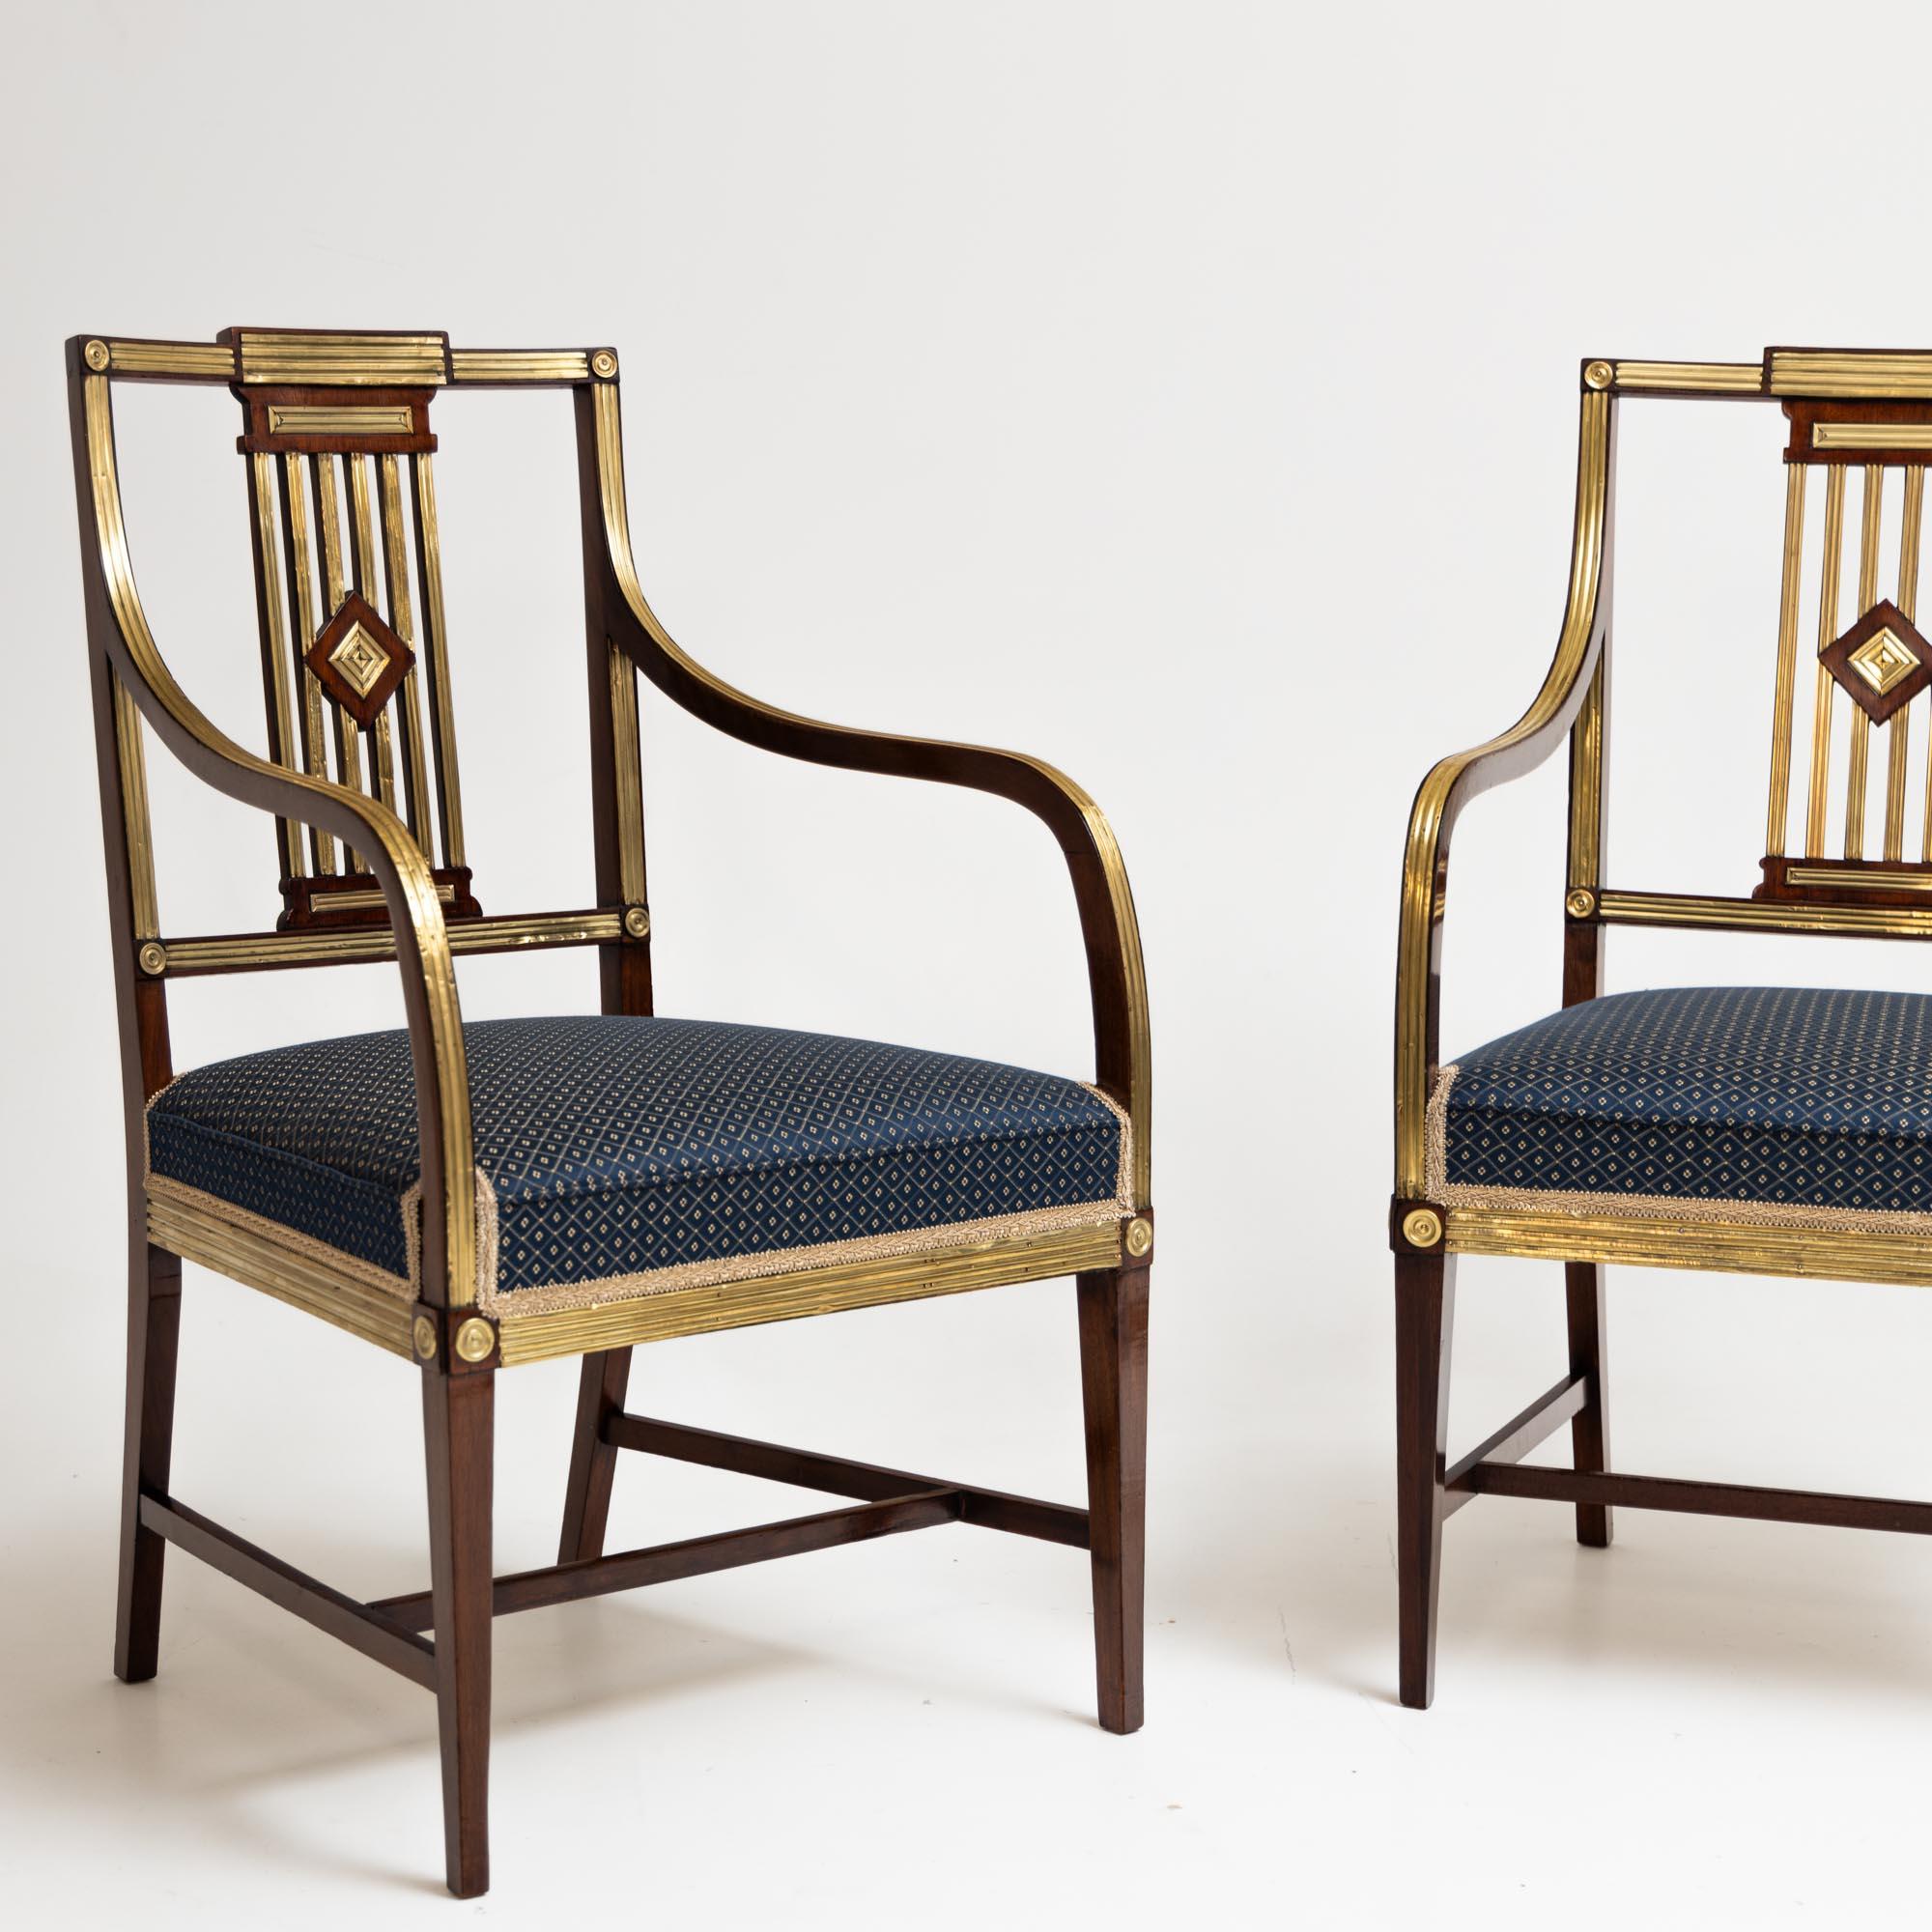 Empire Pair of Neoclassical Dining Room Chairs, Brass, Baltic States, Late 18th Century